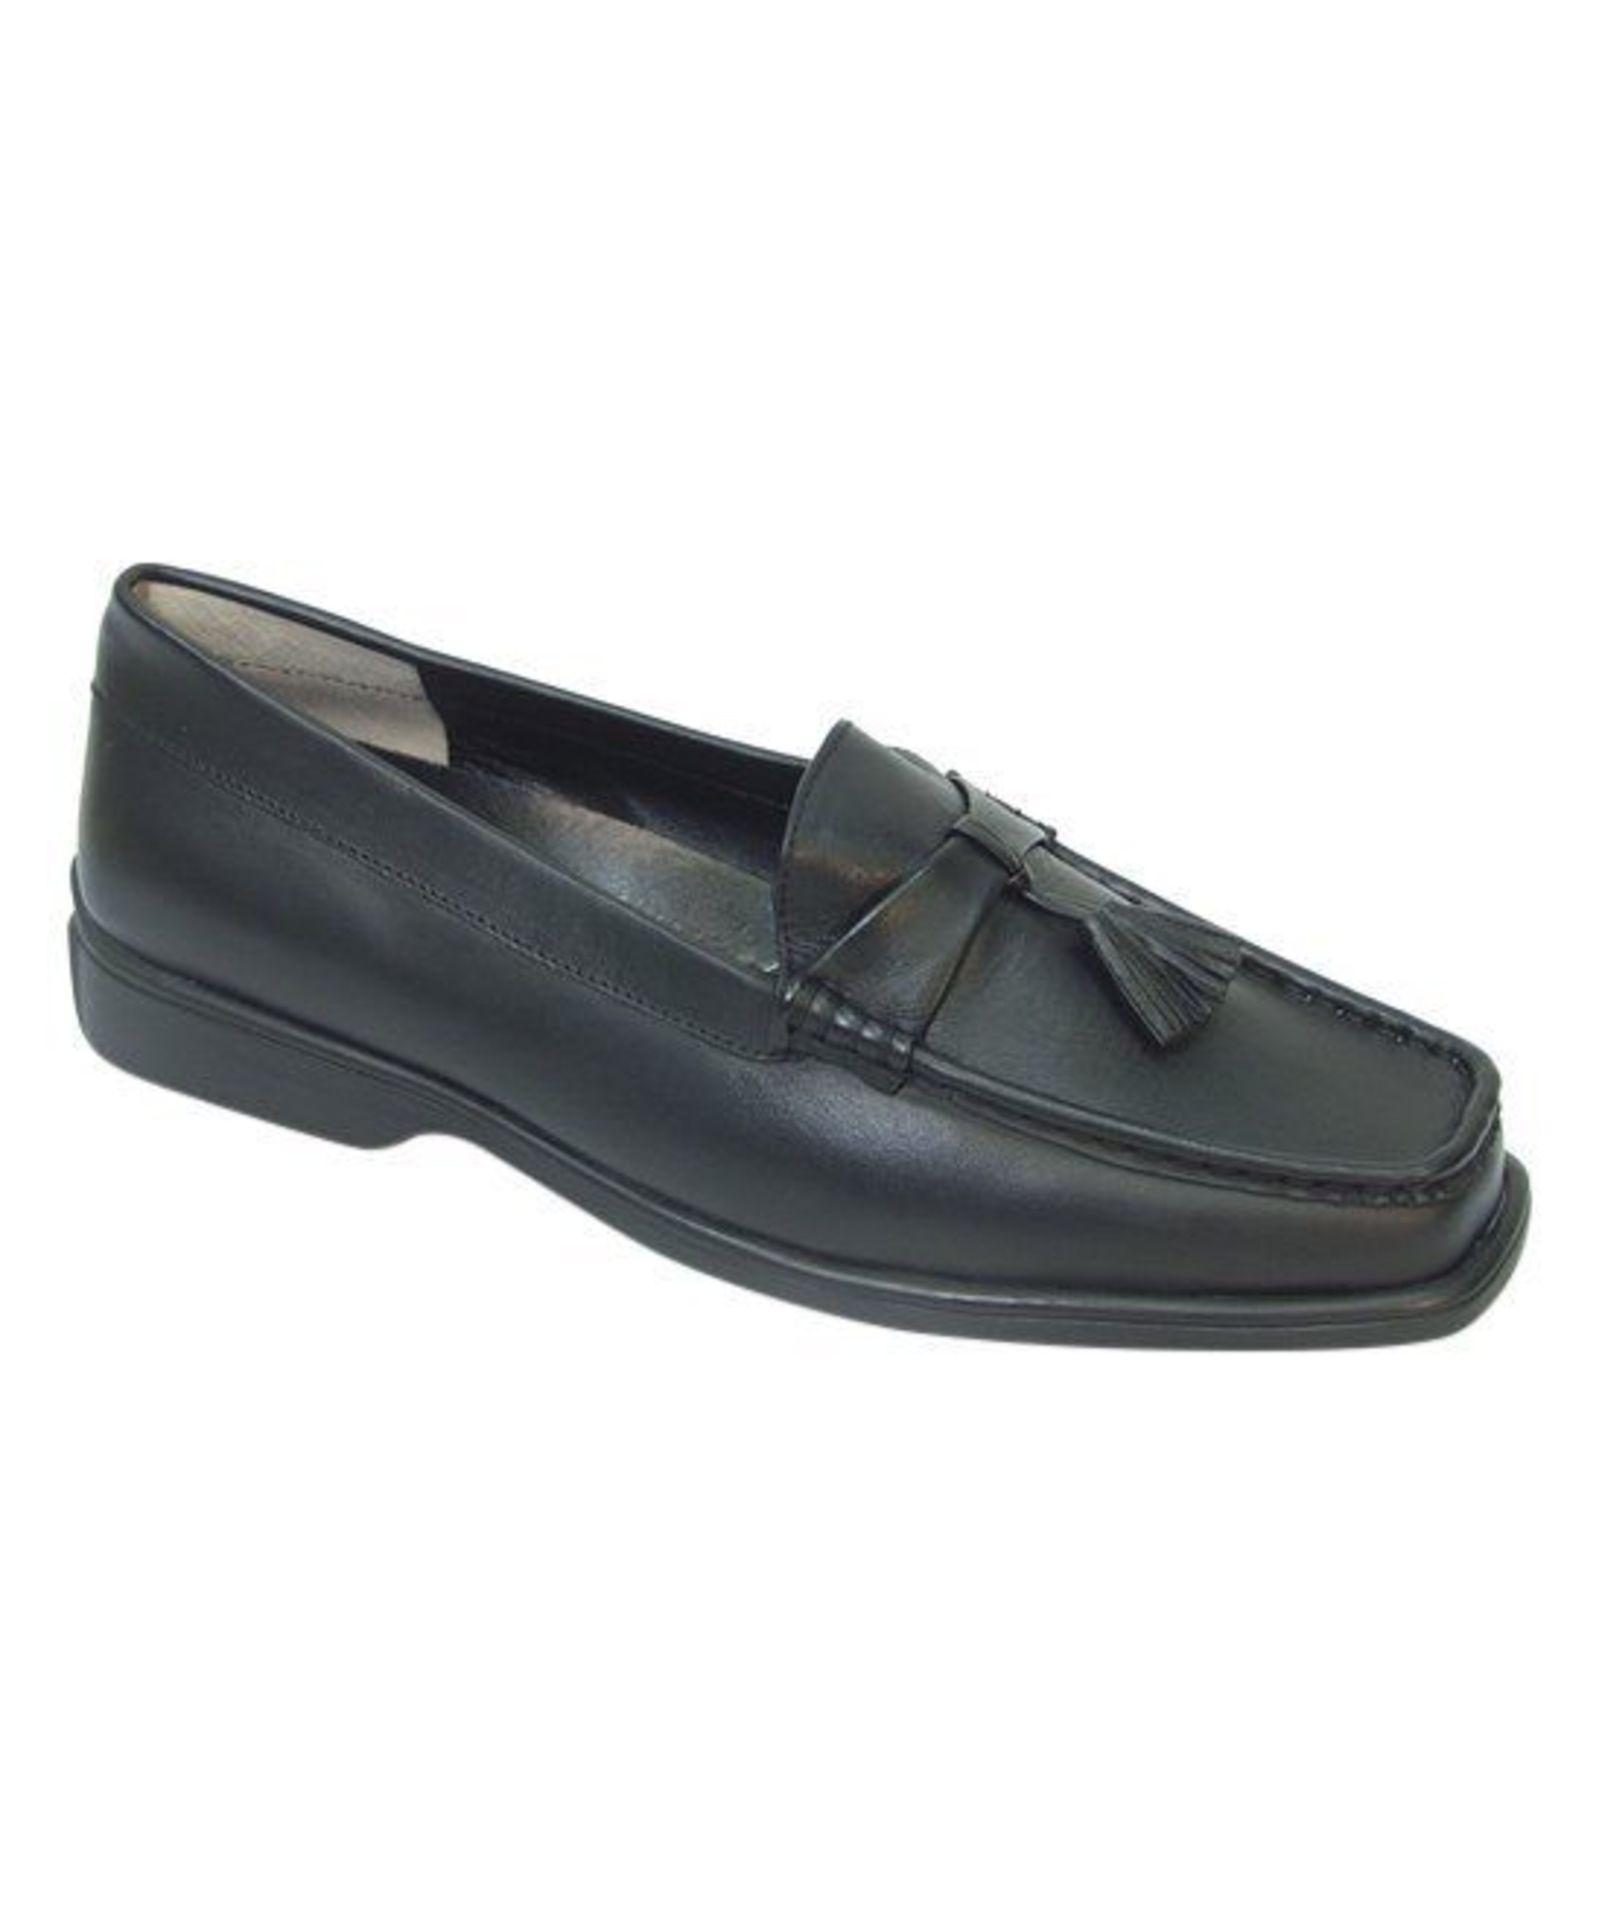 Peerage Black Tassel Leather Loafer (Uk Size:7.5/Us Size:10) (New With Box) [Ref: 36084588-A-002]